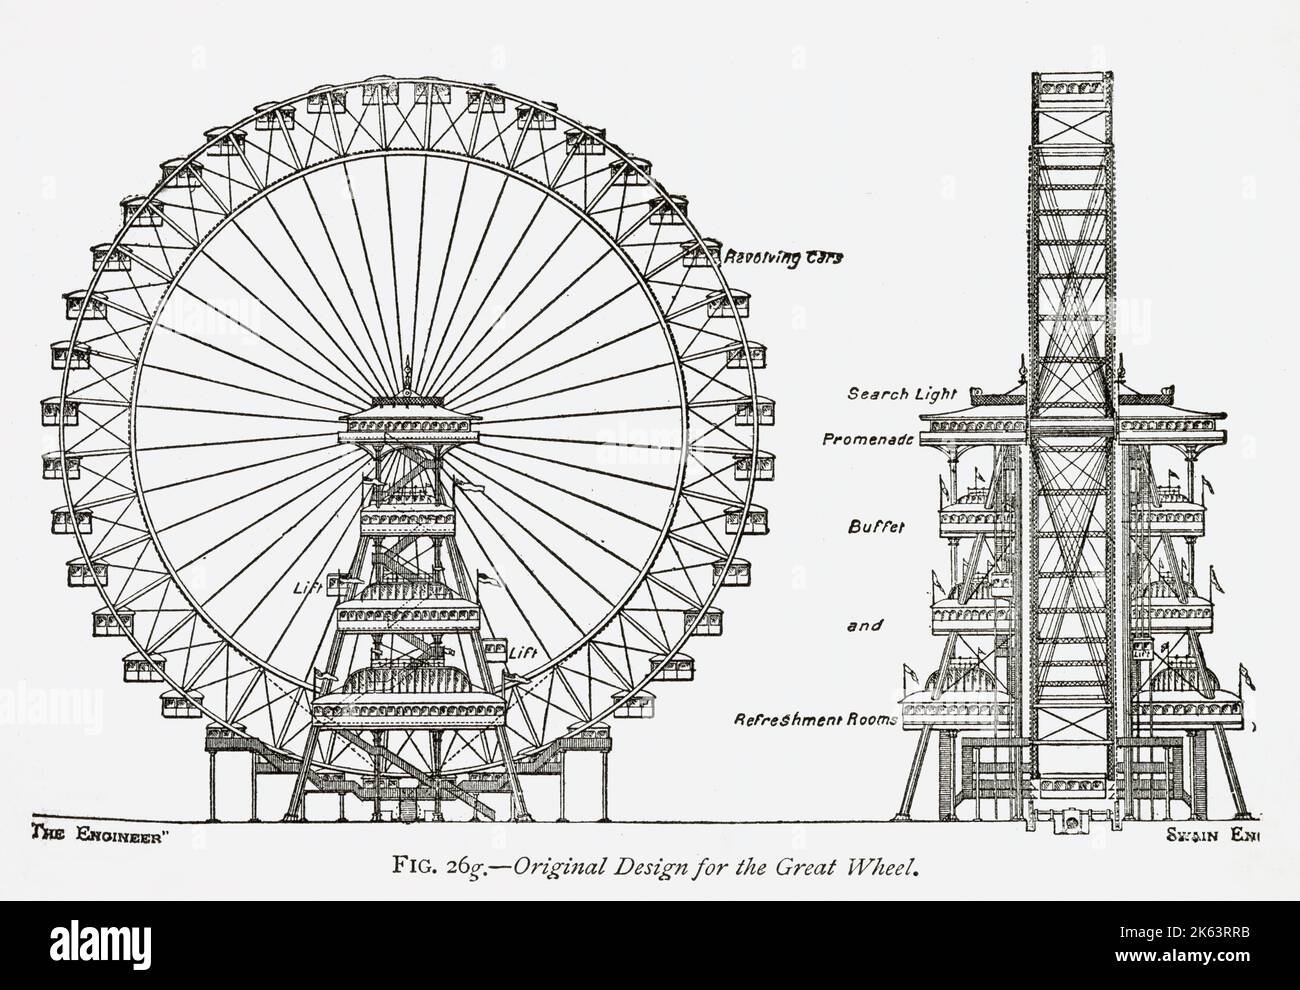 Diagram of the original design for the Great Wheel. Columbian Exposition's tallest attraction, designed and built by George Washington Gale Ferris Jr. The ferris wheel named the Chicago Wheel, was driven by steam engine of one thousand horse-power, at a height of 80.4 metres (264 ft). With thirty-six pendulum cars, each seating forty passengers, carrying 1,440 people at its height. Stock Photo